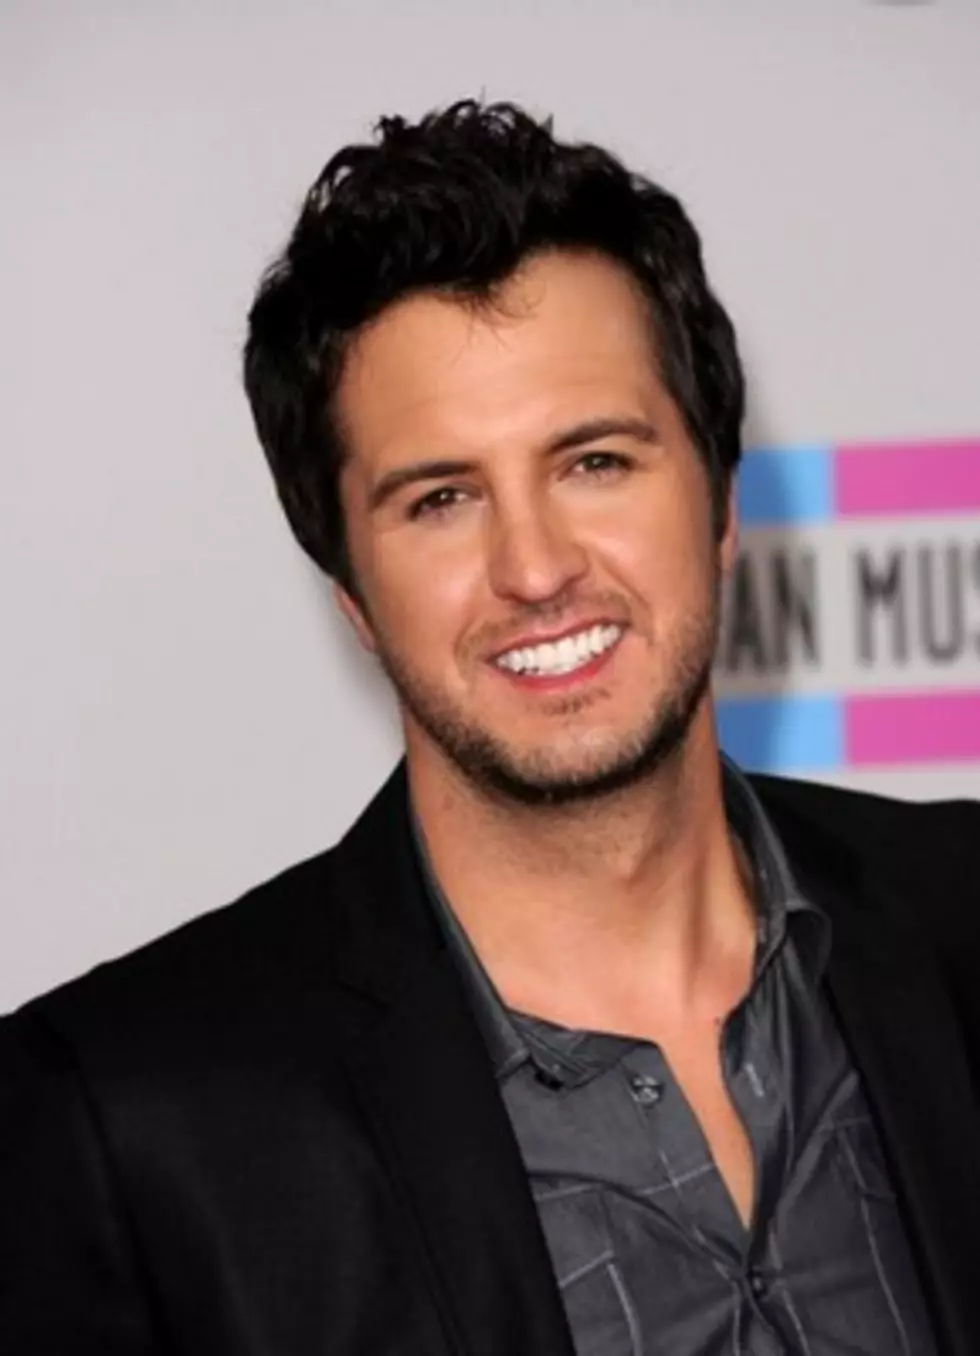 “I Don’t Want This Night To End” #1 for Luke Bryan